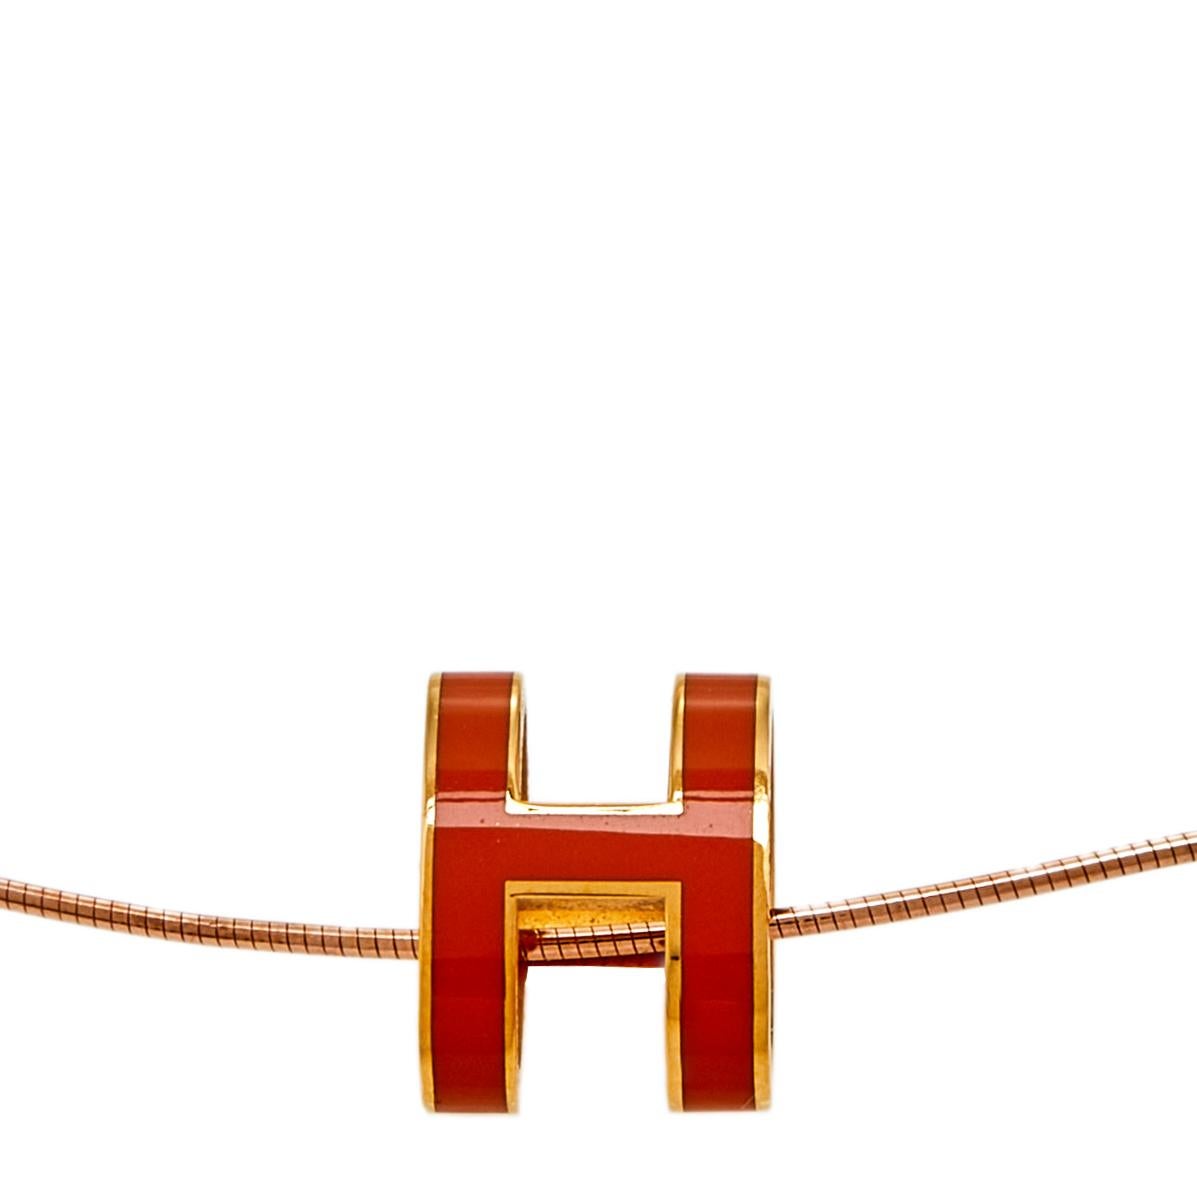 This stunning rose gold-plated metal necklace by Hermès is minimal and effortlessly stylish to pair with any outfit. Featuring a signature logo H-shaped pendant tinted with orange enamel, this Pop H necklace is a practical and simple piece that can